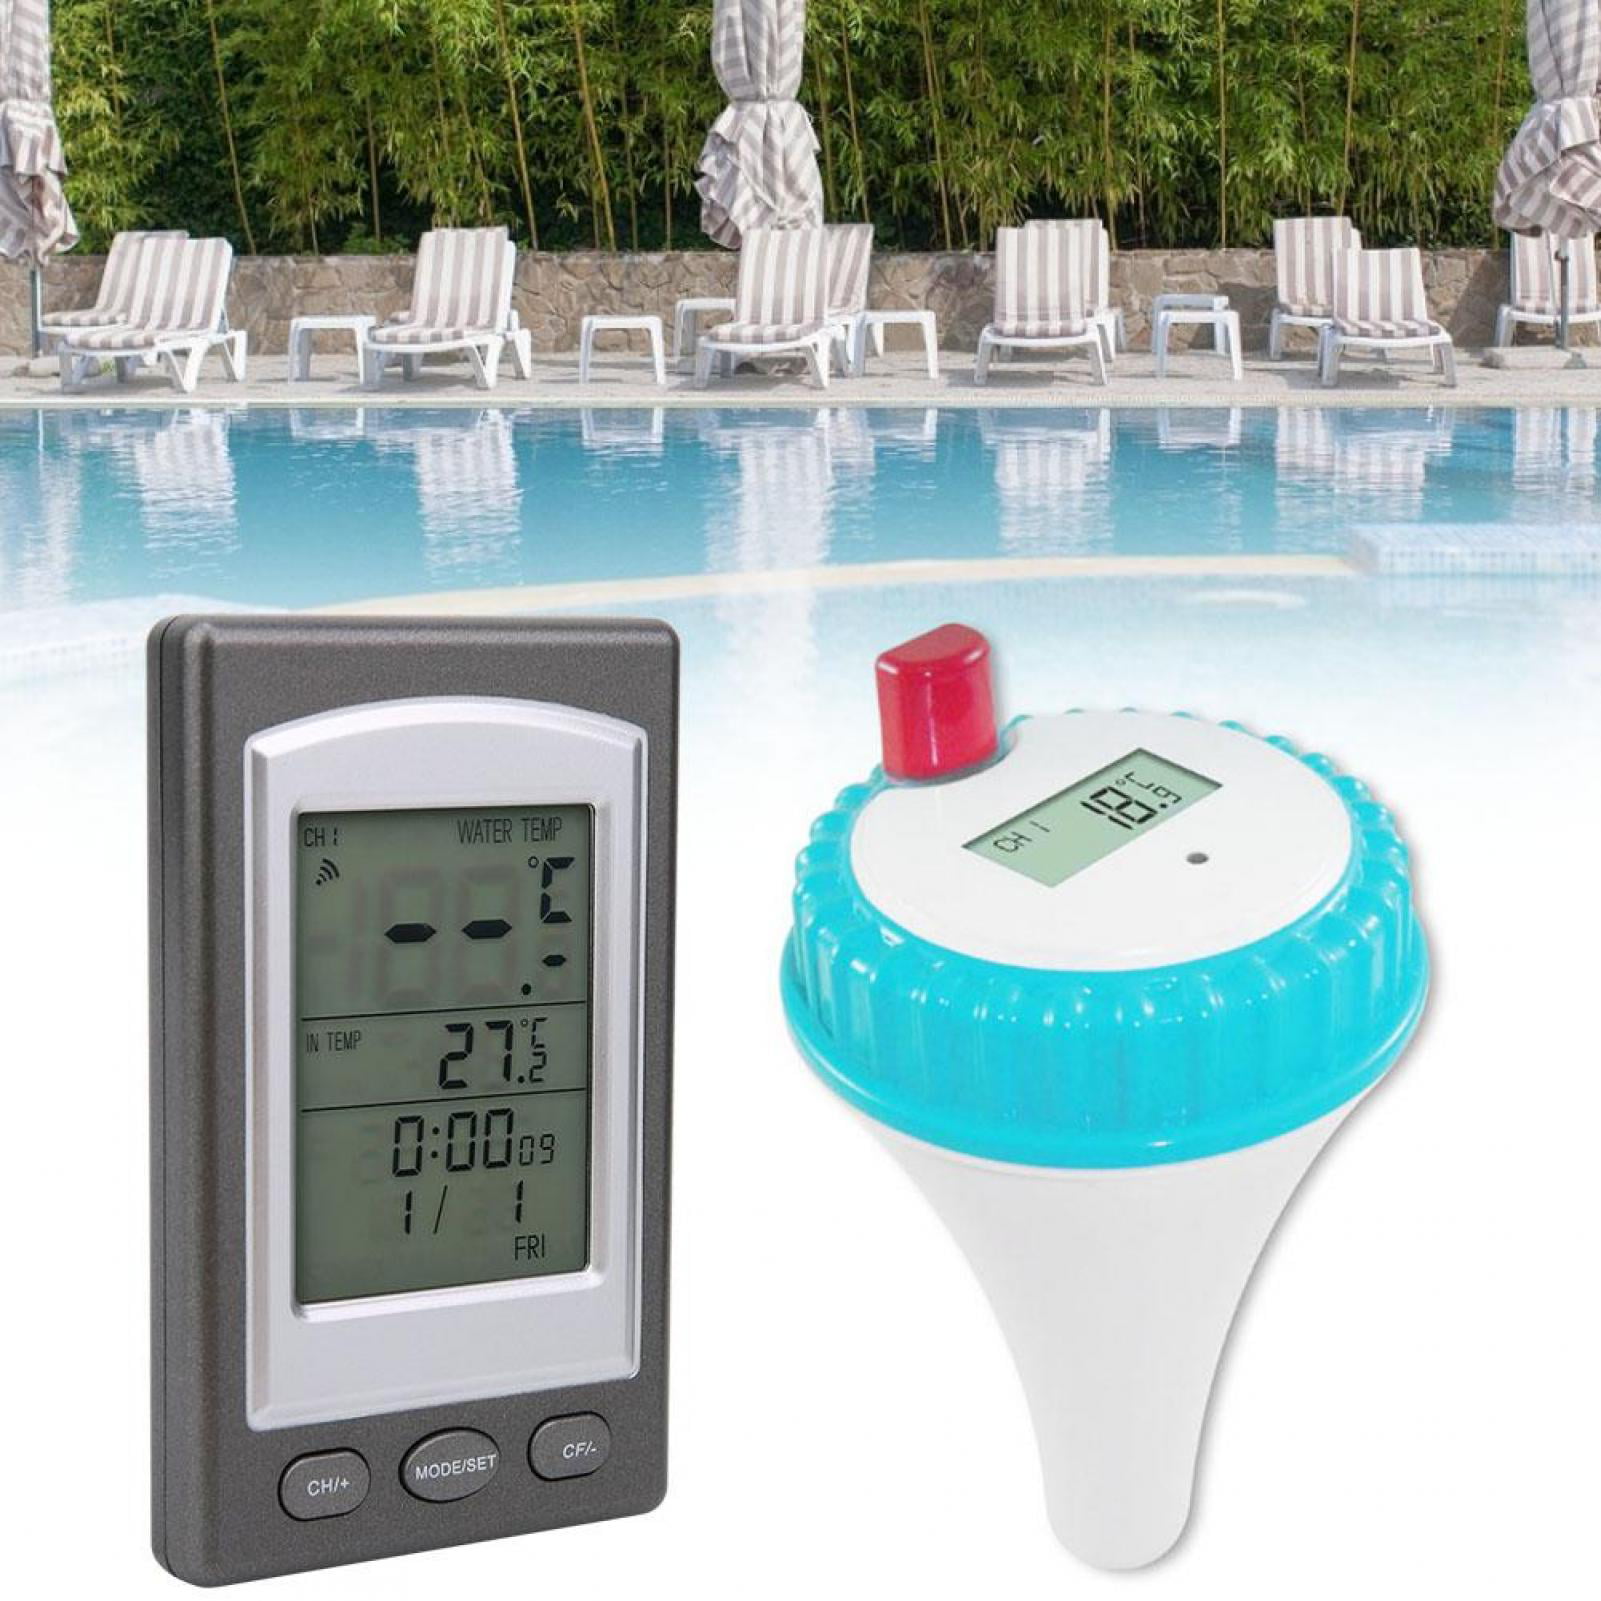 Water Temperature Meter Floating Thermometer Swimming Pool Bath Tub Temp Gauge A 